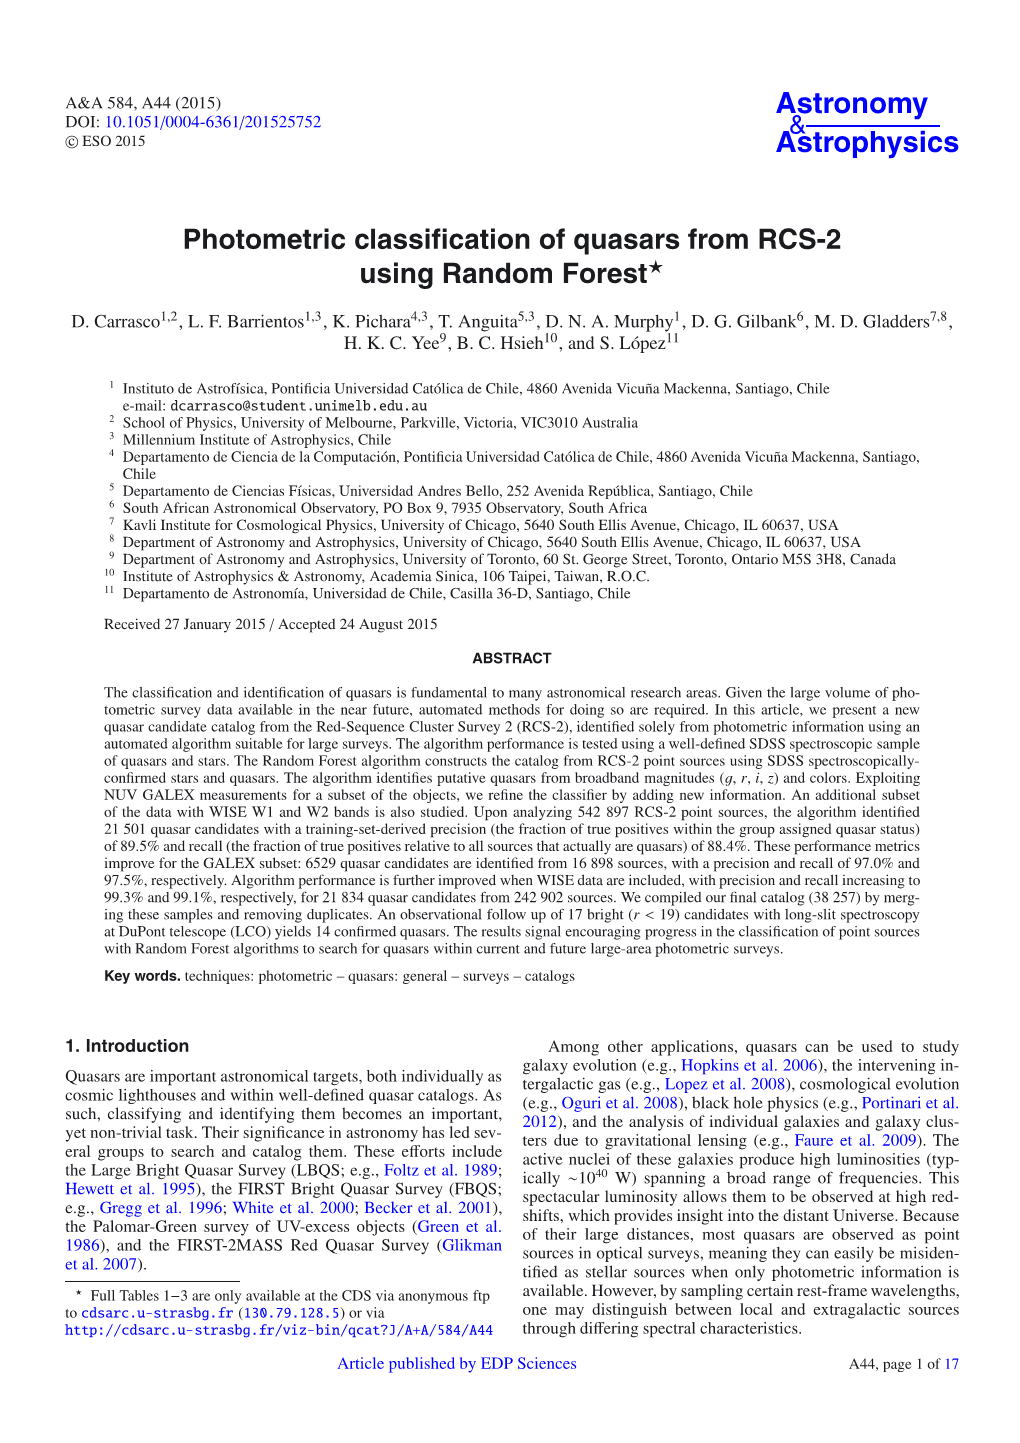 Photometric Classification of Quasars from RCS-2 Using Random Forest⋆